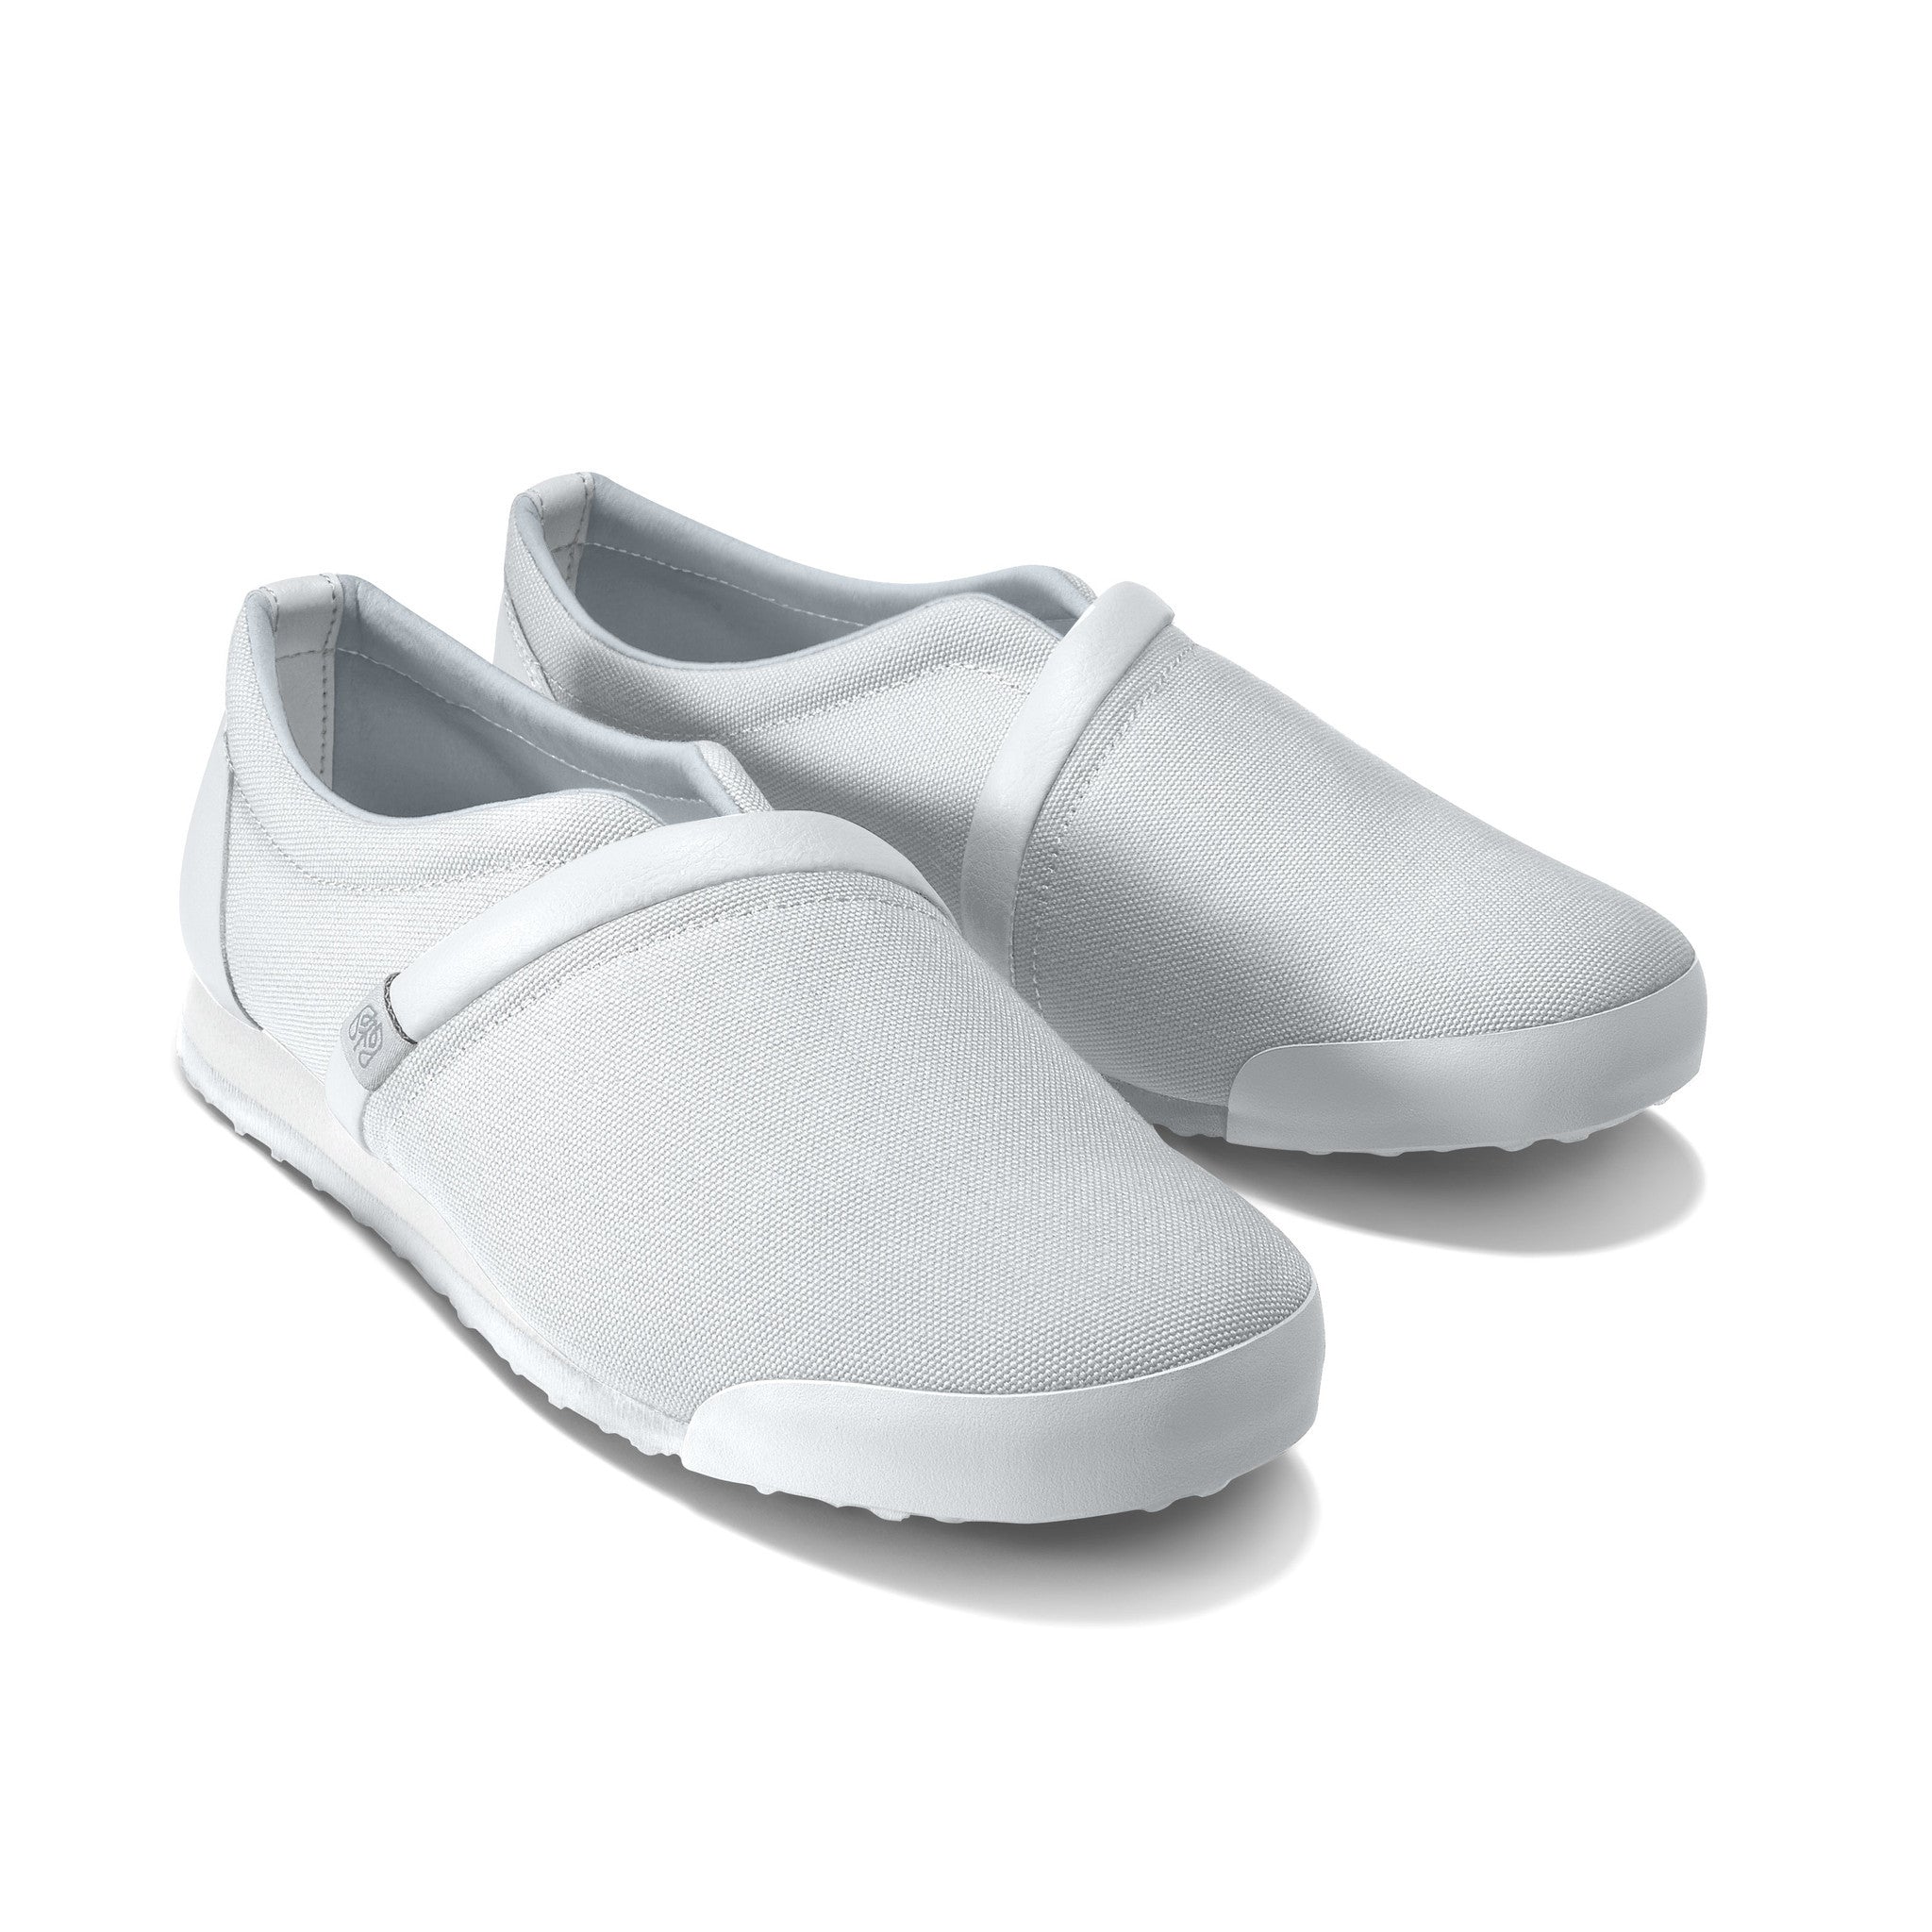 Bright_White - Common Ground Footwear Shoes Right Perspective View